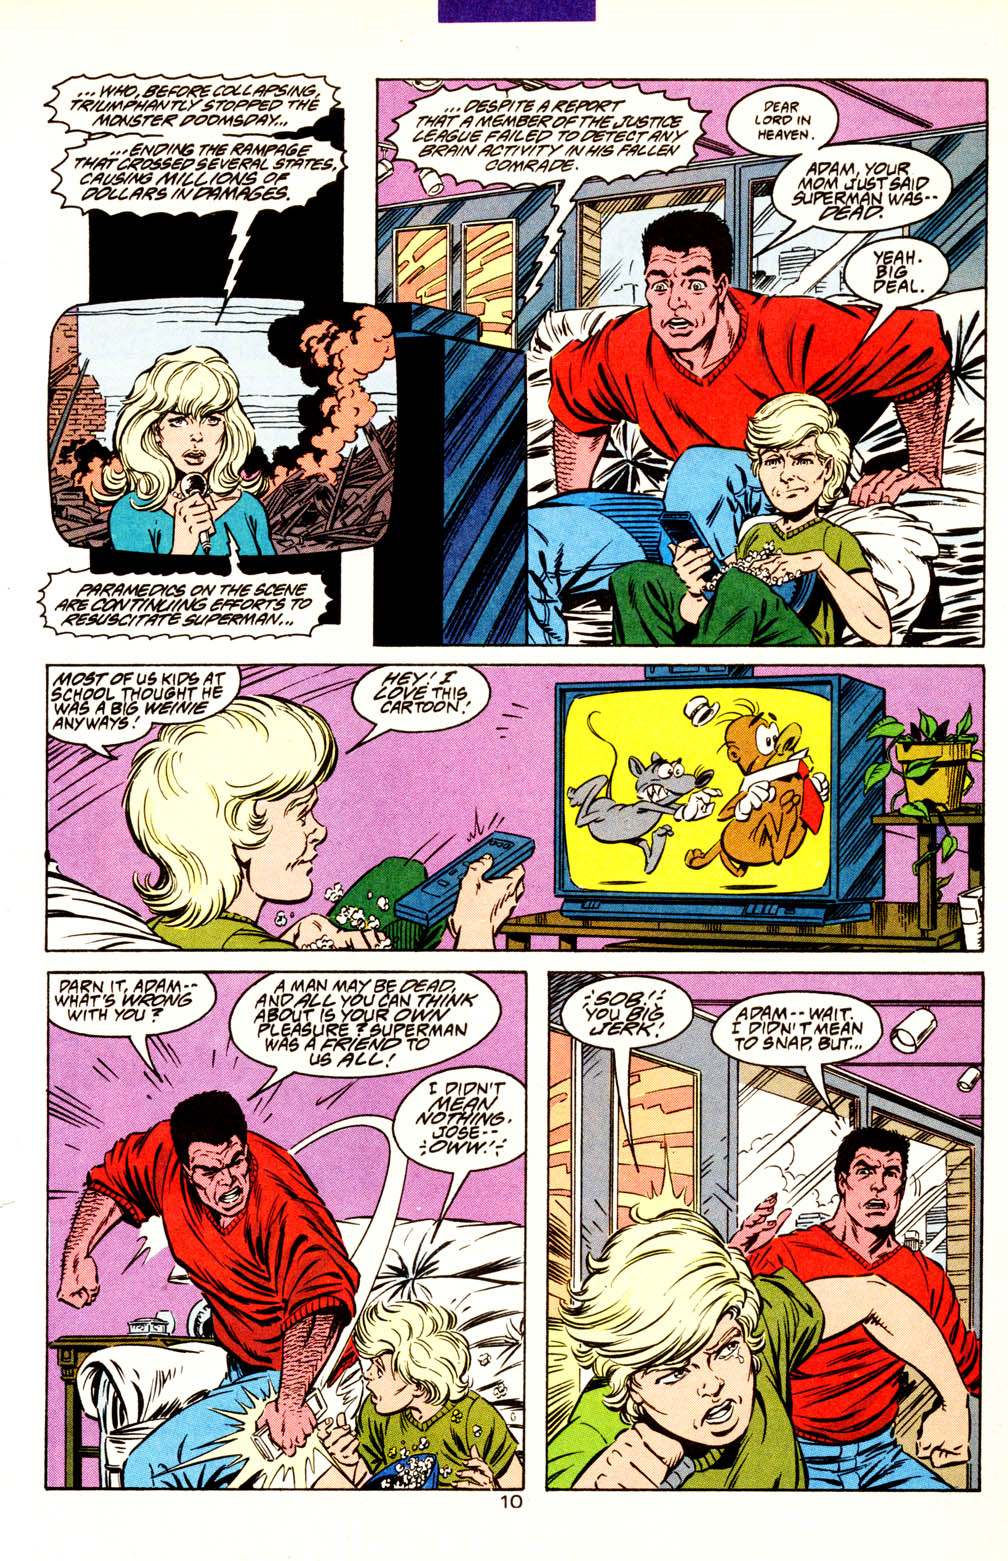 Adventures of Superman (1987) 498 Page 11